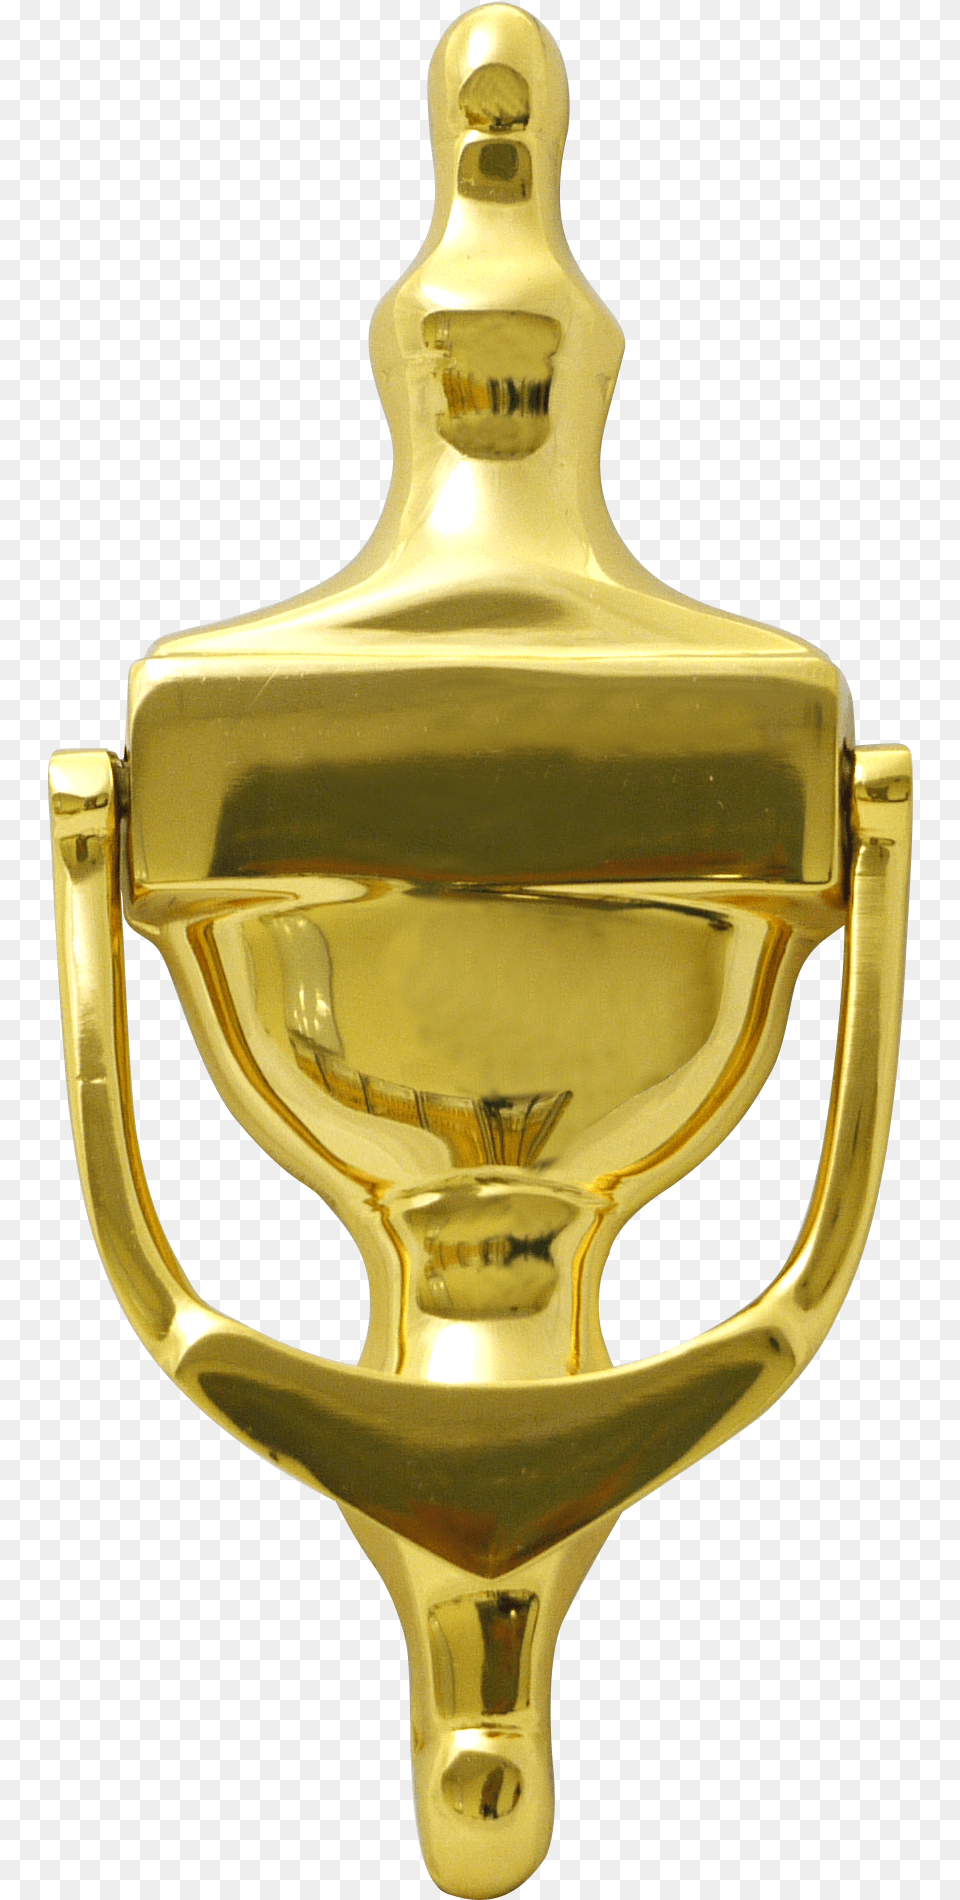 The Victorian Polished Brass Door Knockers Are Available Brass 6 Victorian Urn Door Knocker With Hole For Viewerspyhole, Gold, Trophy, Smoke Pipe Png